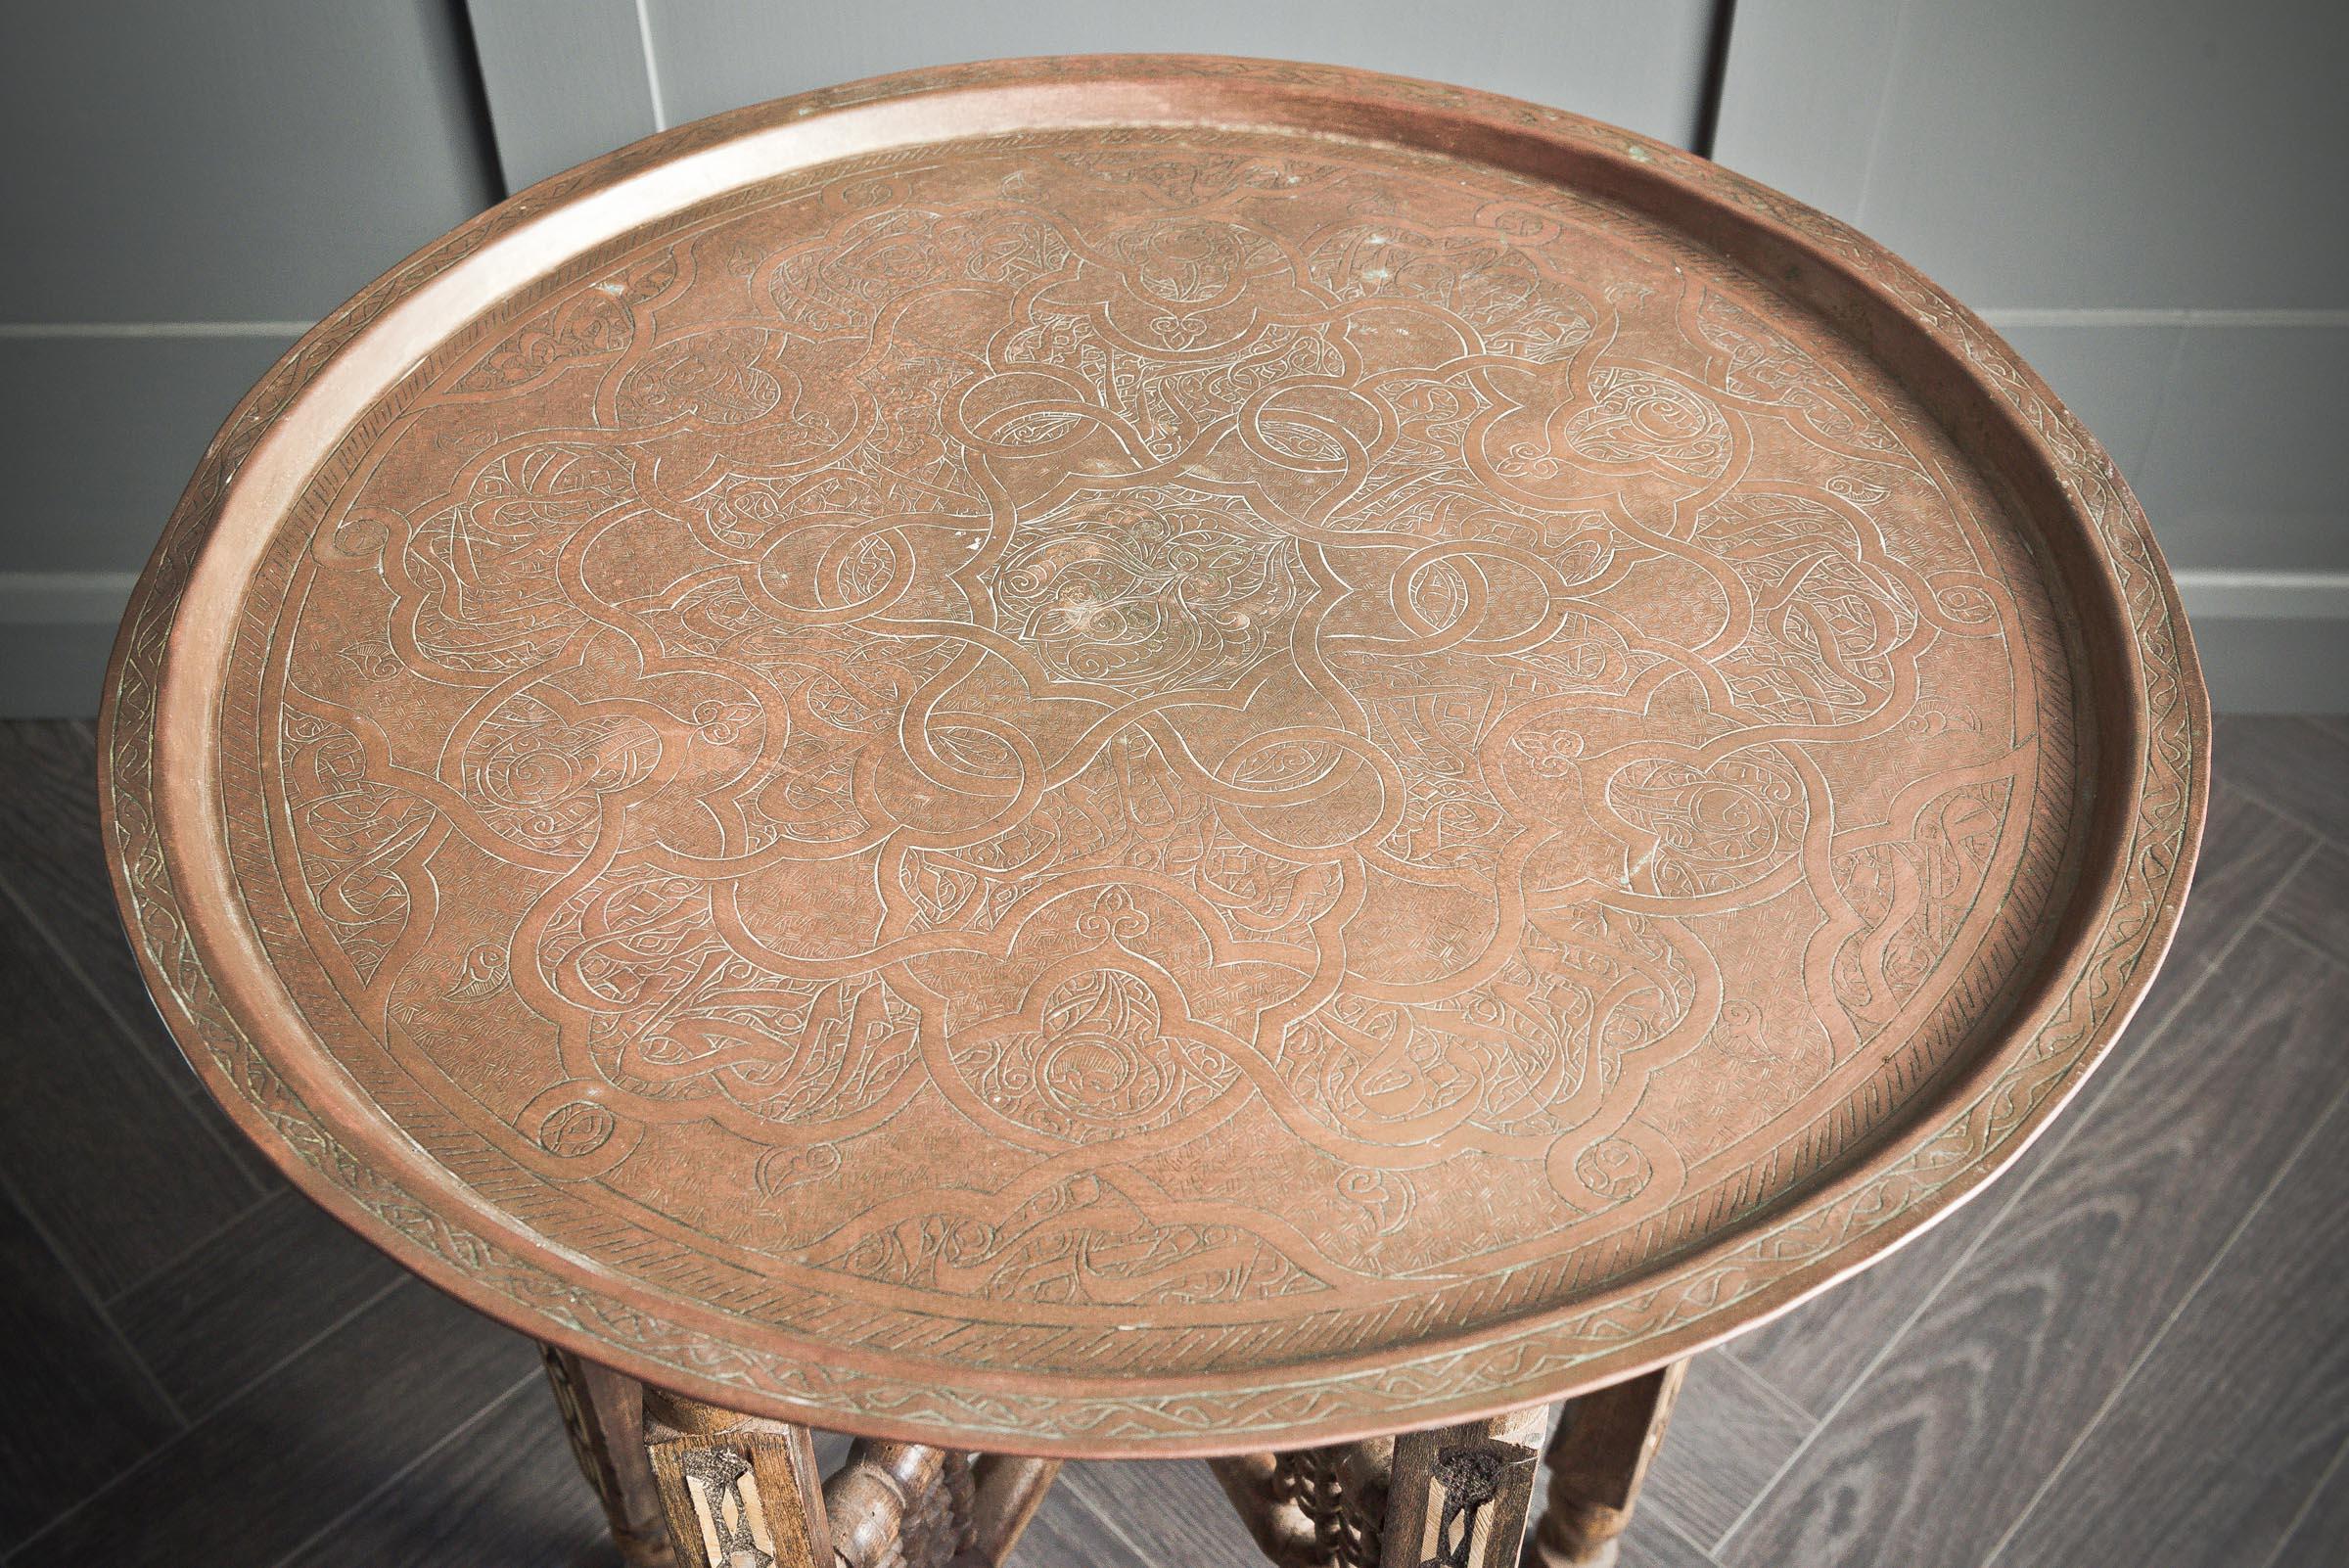 Indian folding console table with engraved copper top.